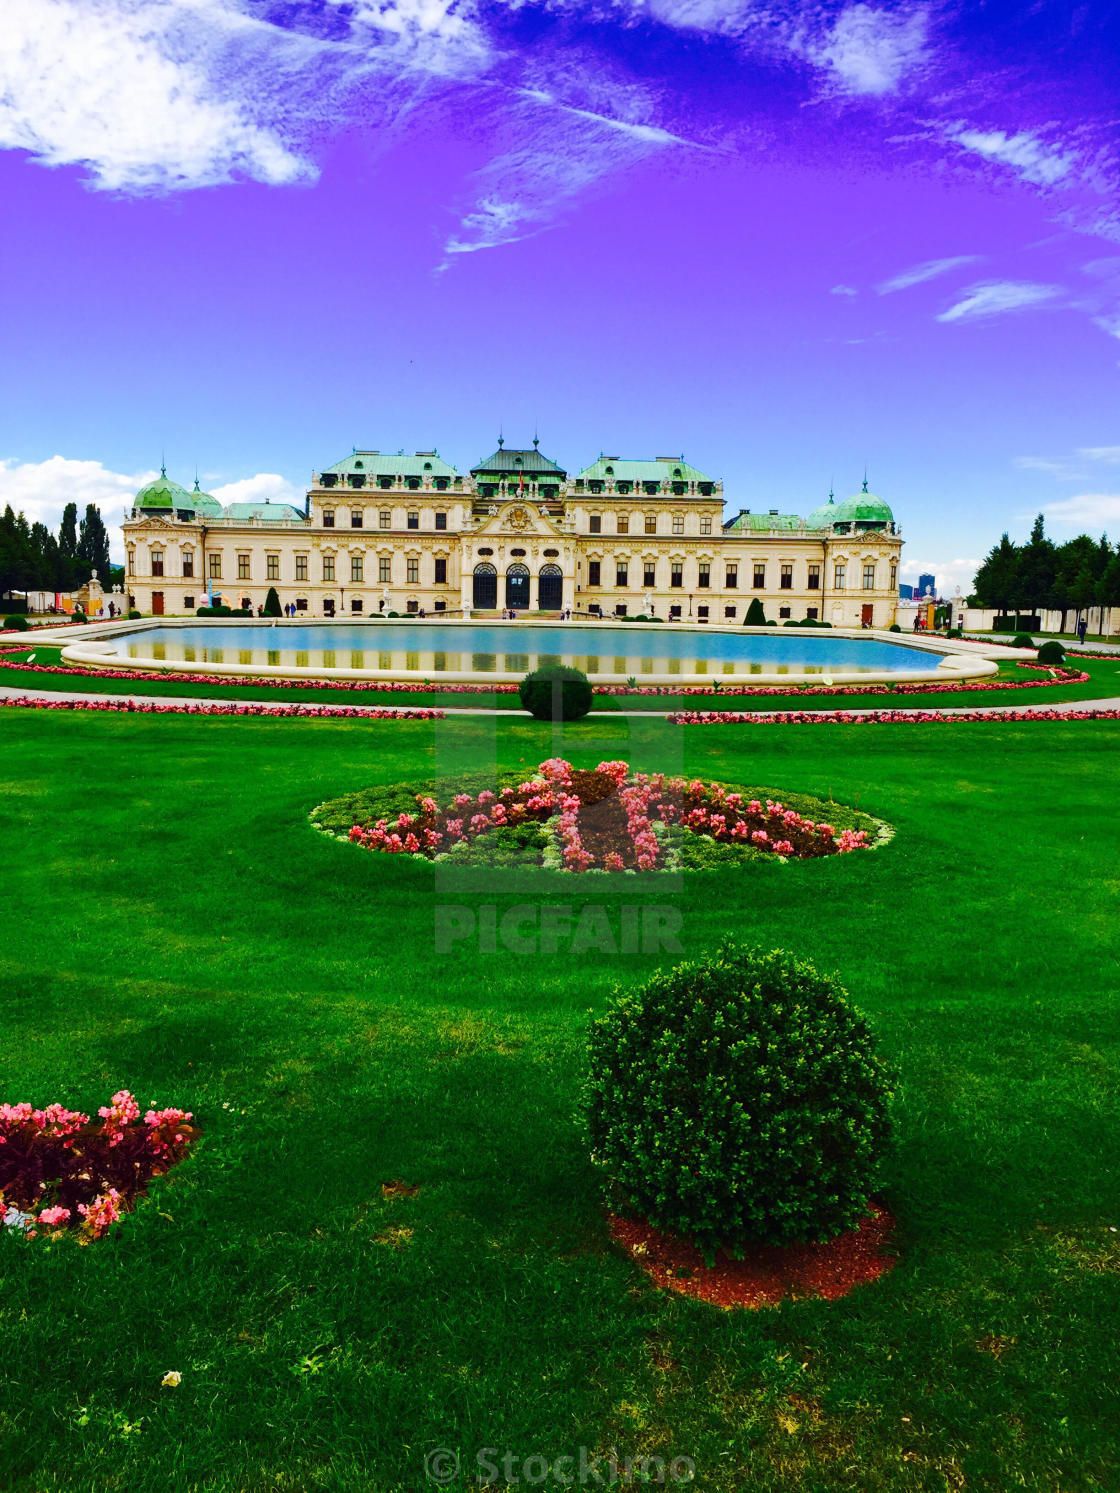 Belvedere Palace in Vienna, Austria, download or print for £31.00